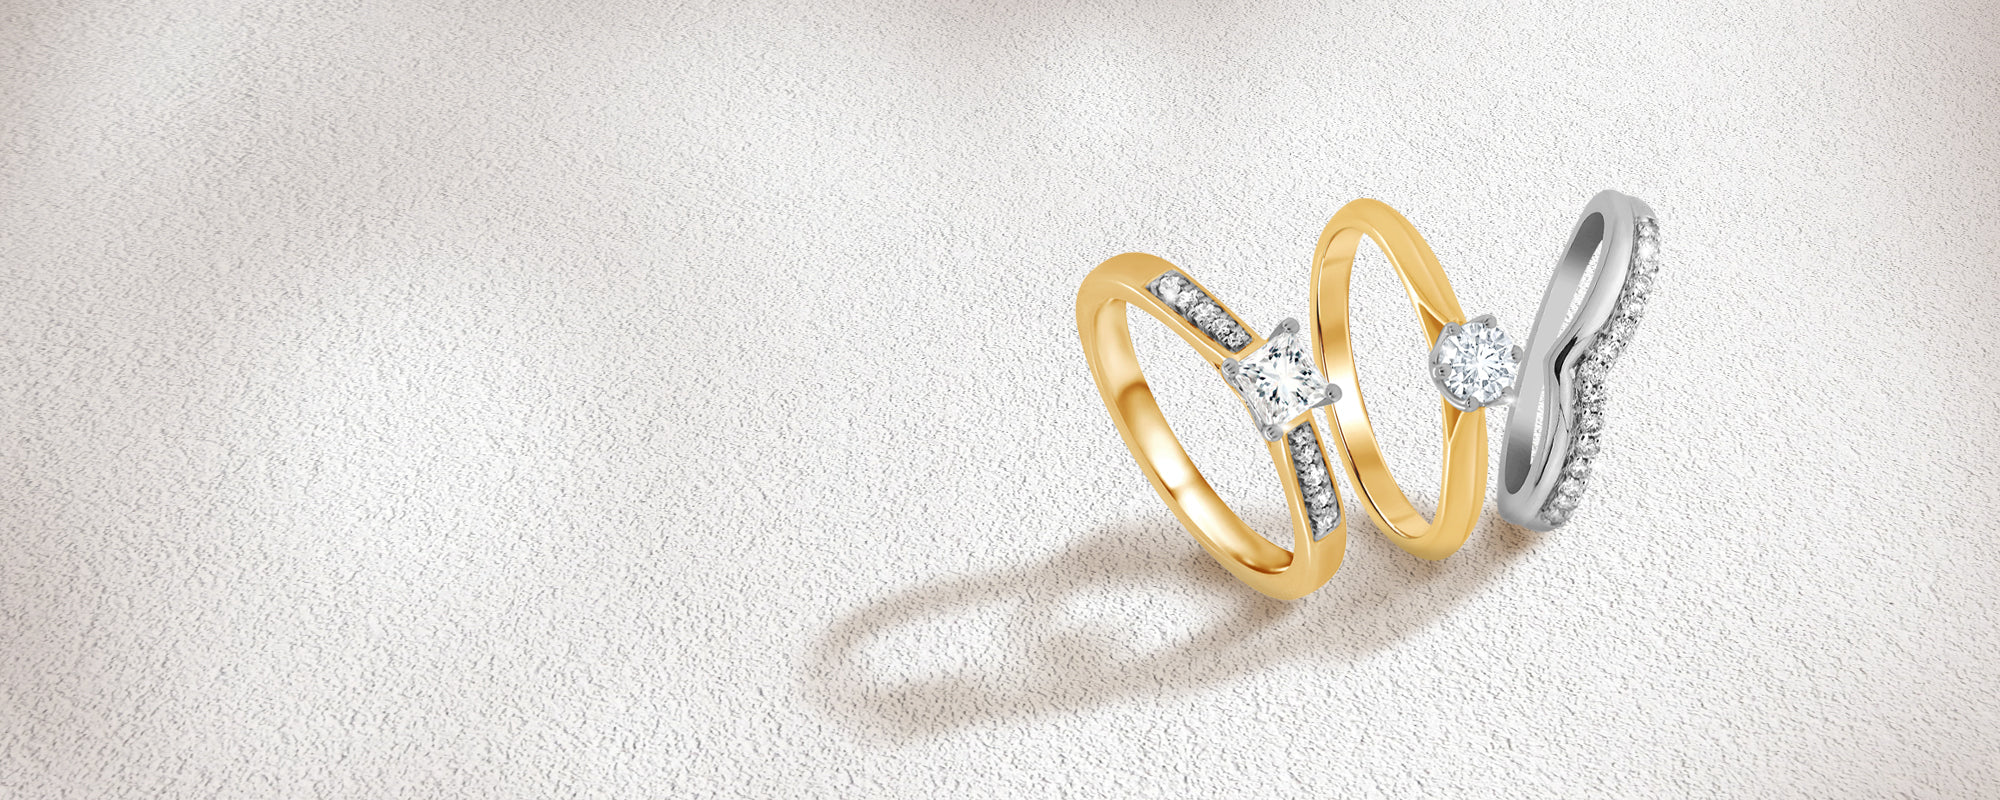 eas gold and platinum diamond engagement rings